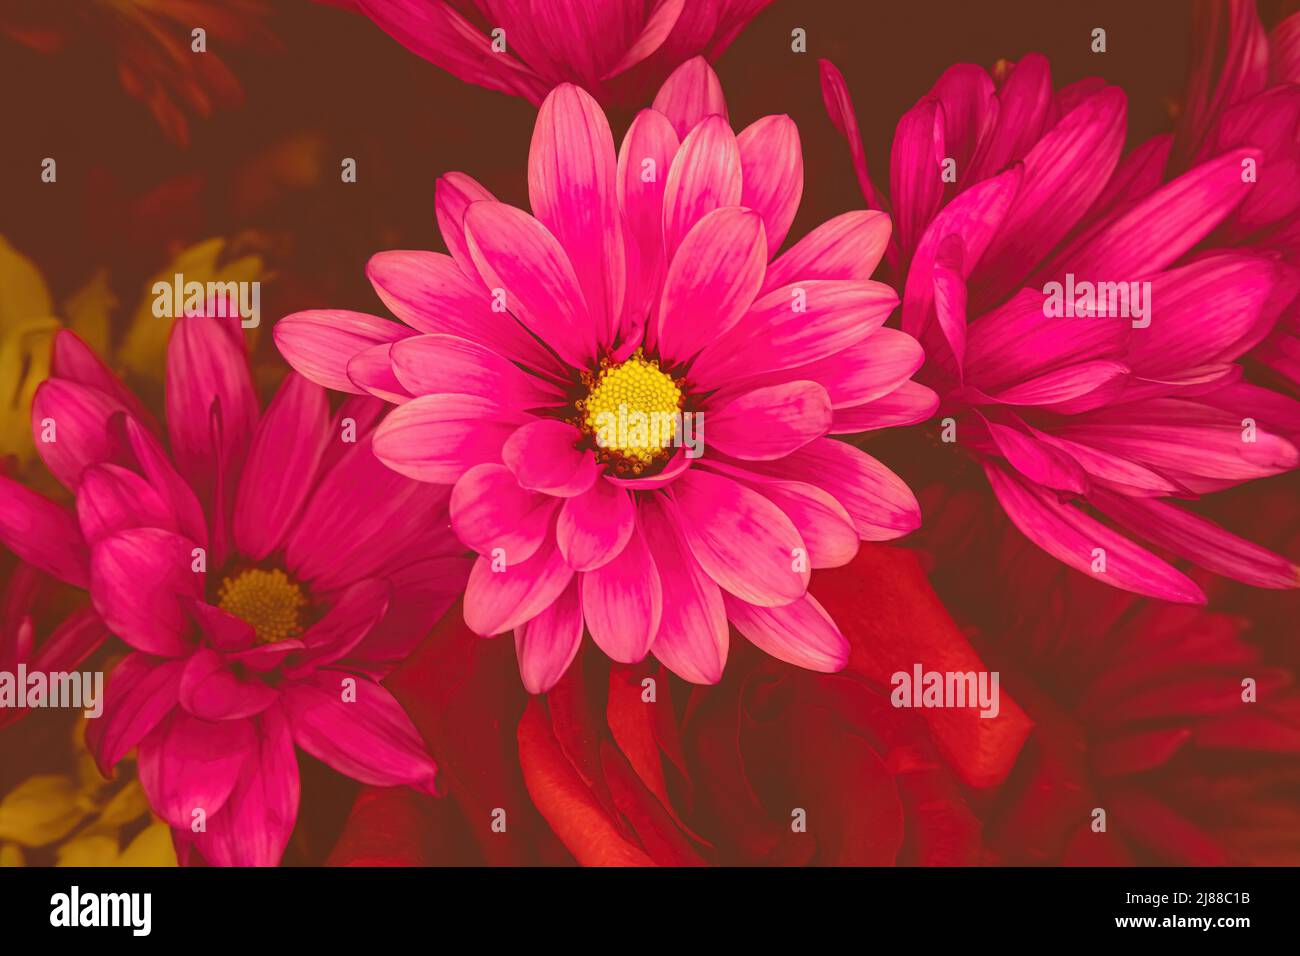 Pink daisies and red roses below with dark background Stock Photo